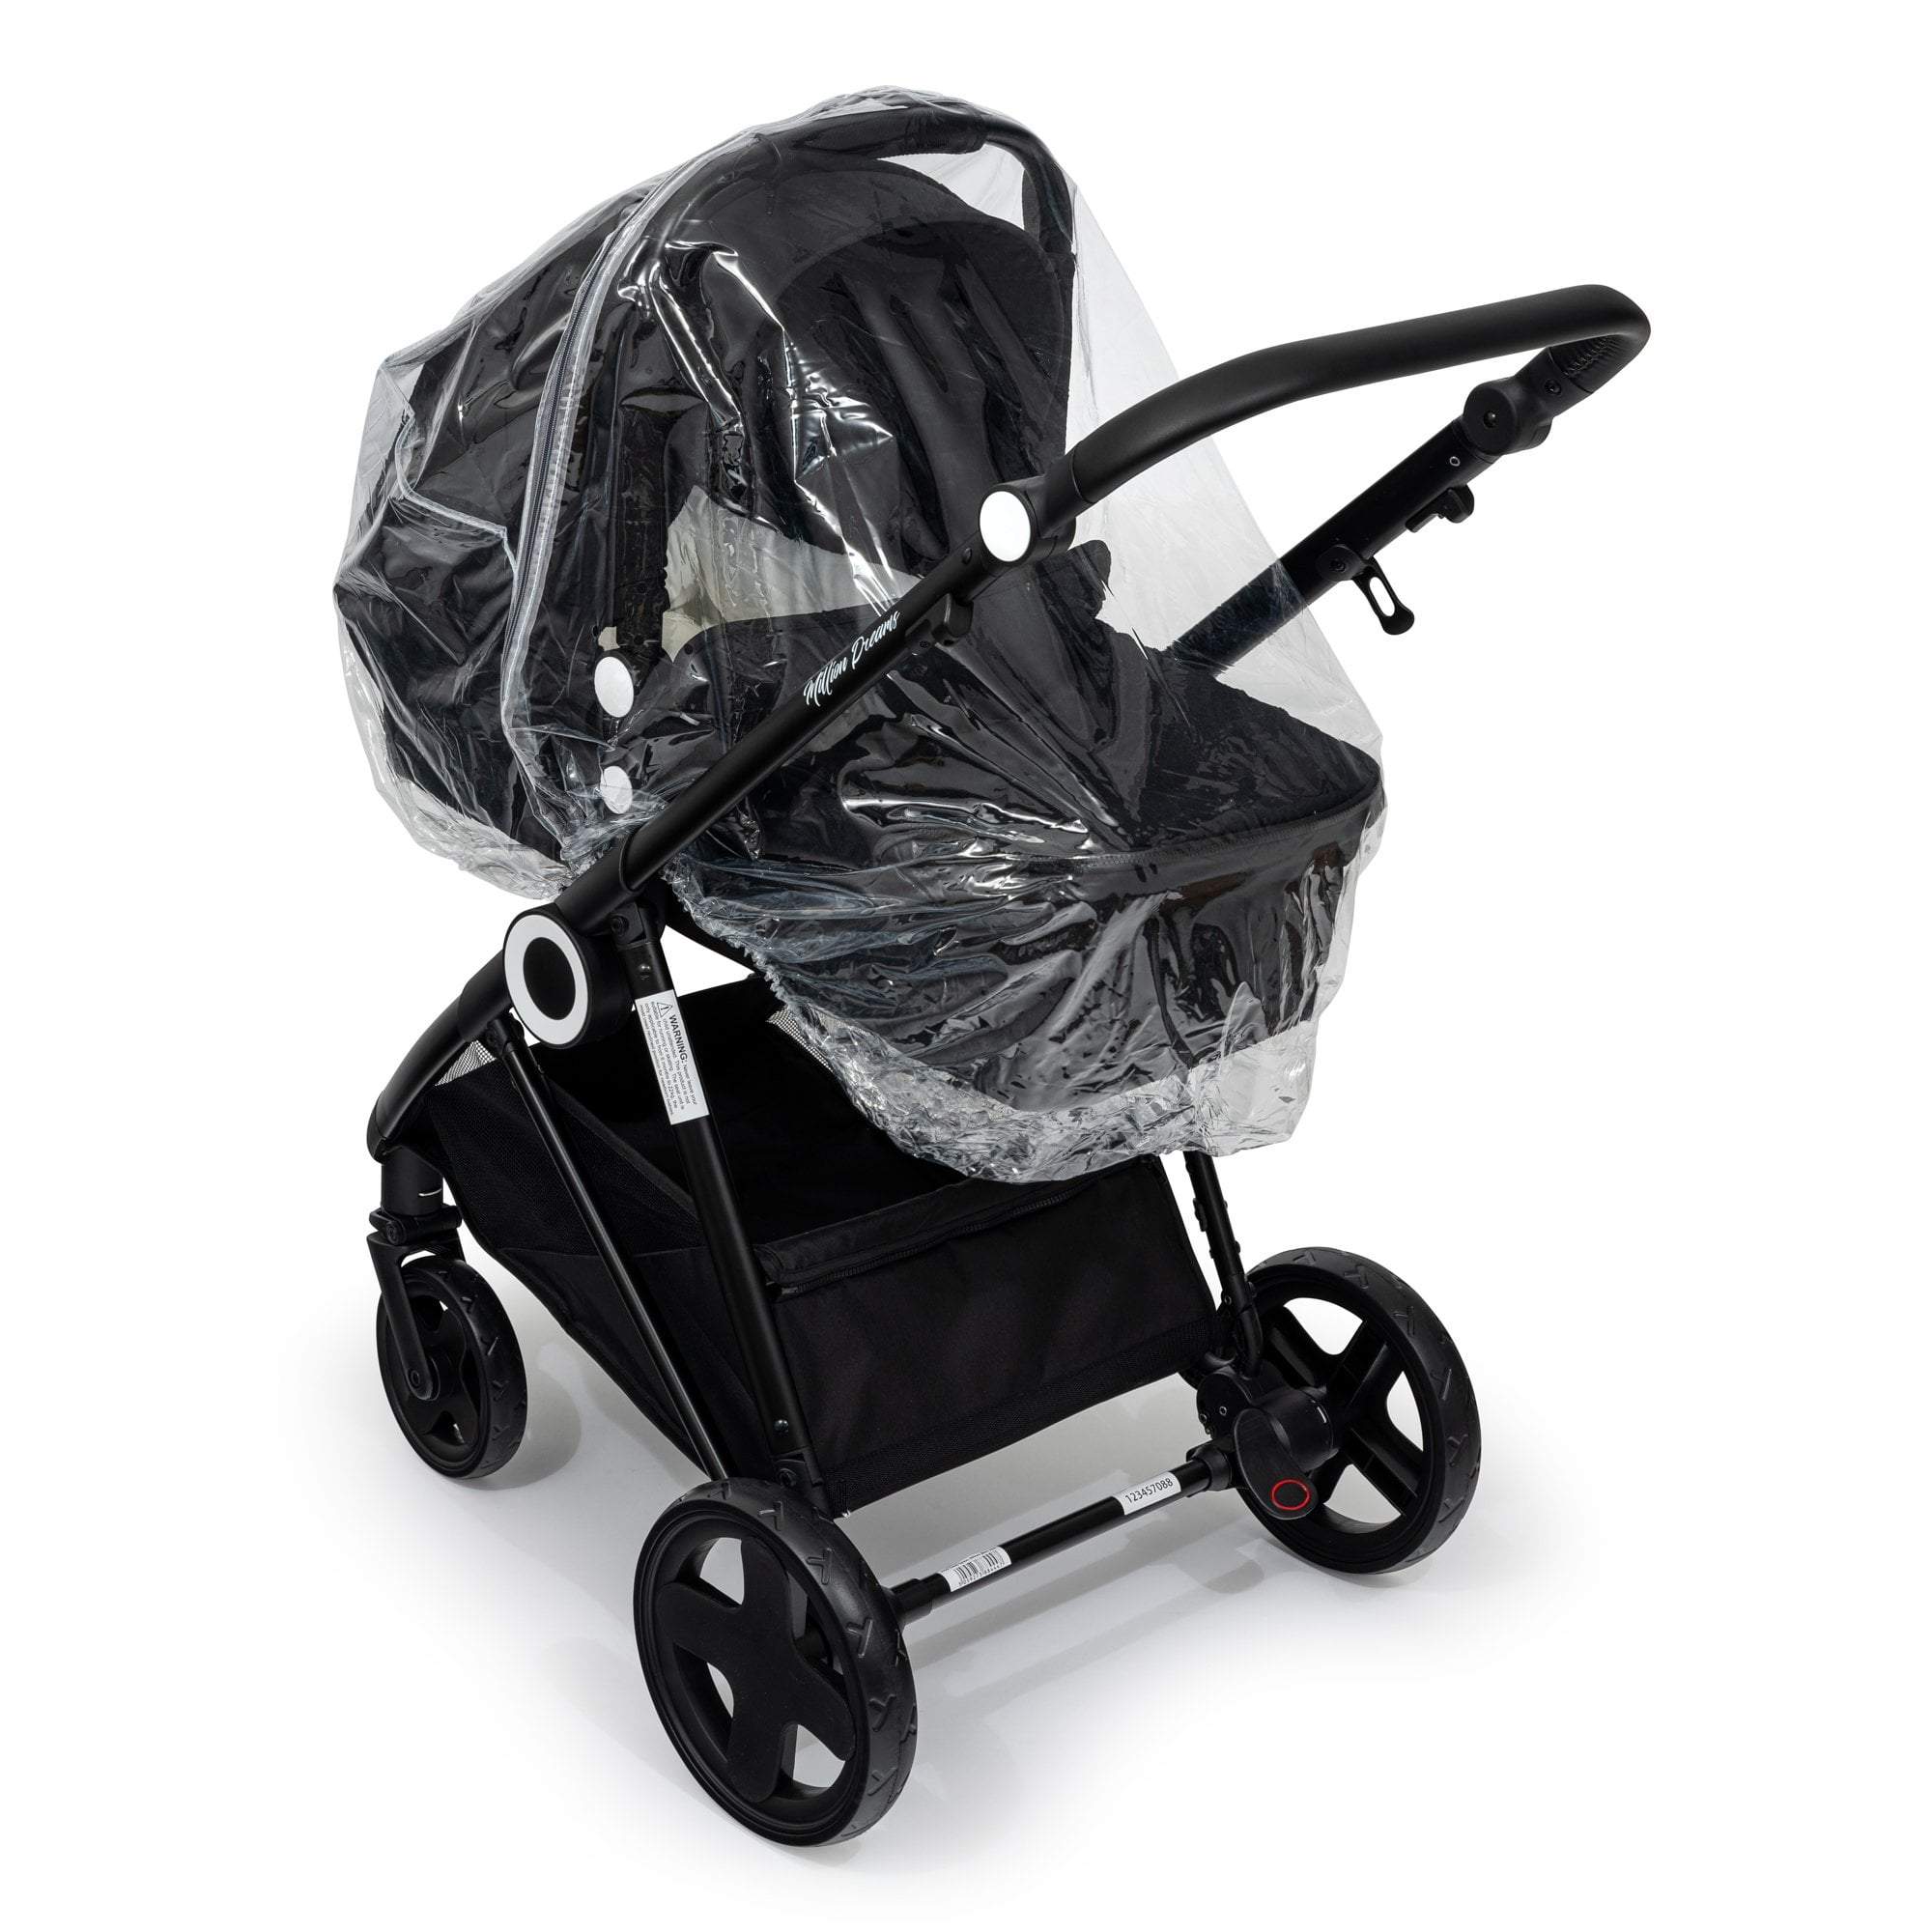 Carrycot Raincover Compatible With Firstwheels - Fits All Models - For Your Little One